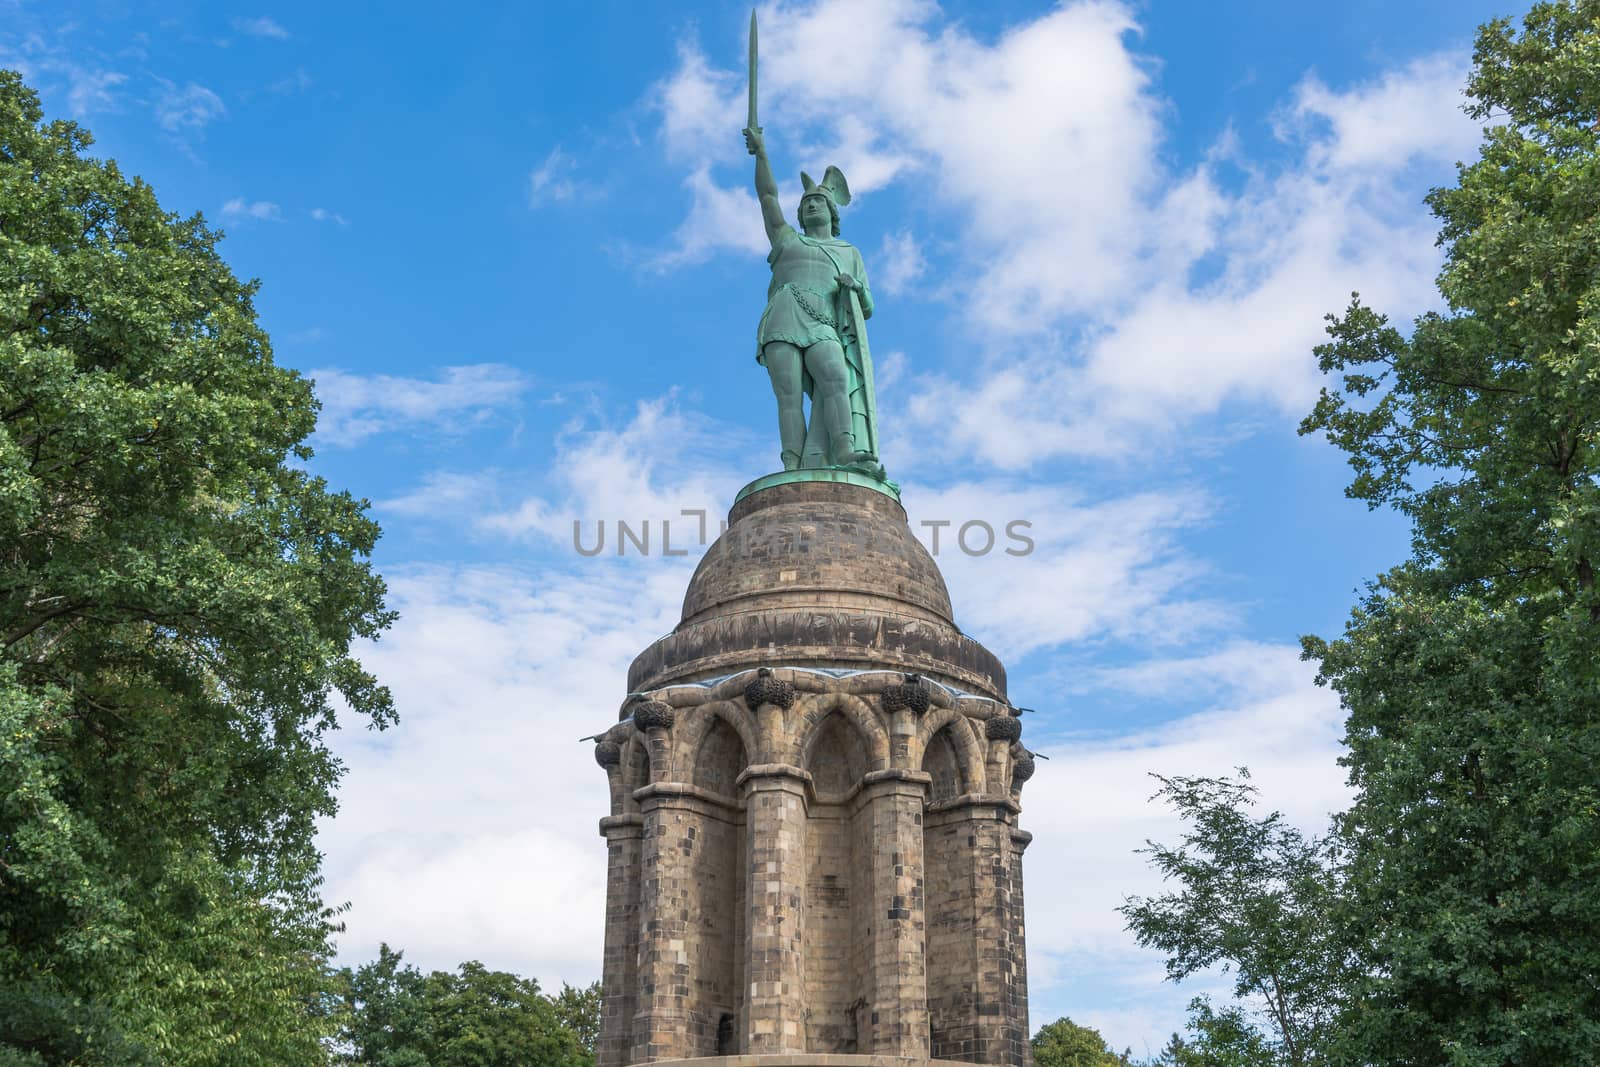 Statue of Cheruscan Arminius in the Teutoburg Forest near the city of Detmold, Germany.